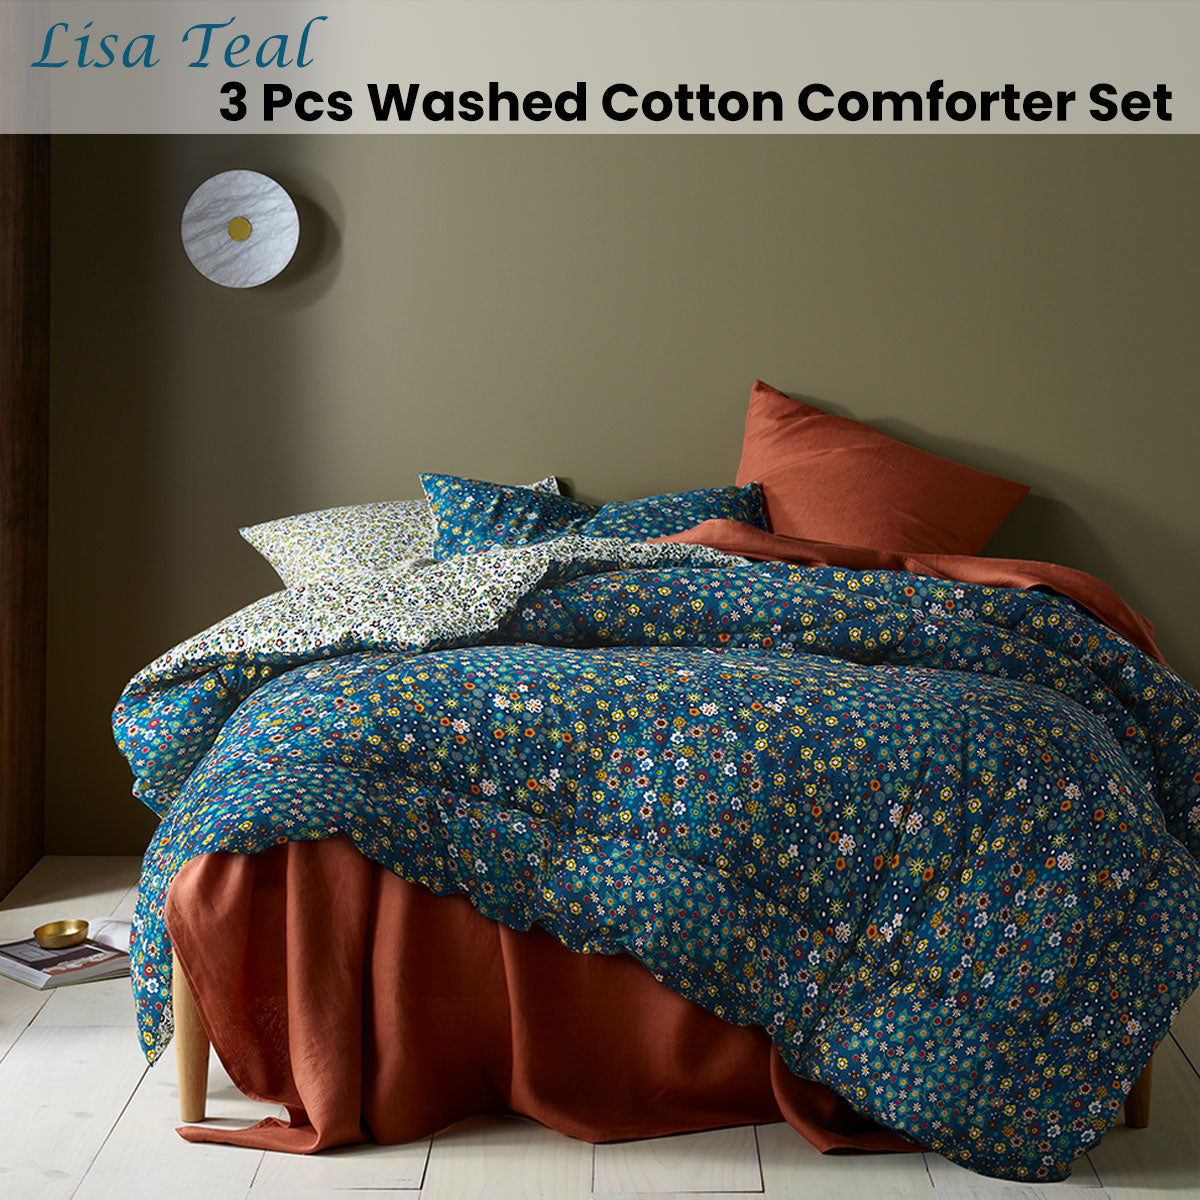 Accessorize Lisa Teal Washed Cotton Printed 3 Piece Comforter Set King